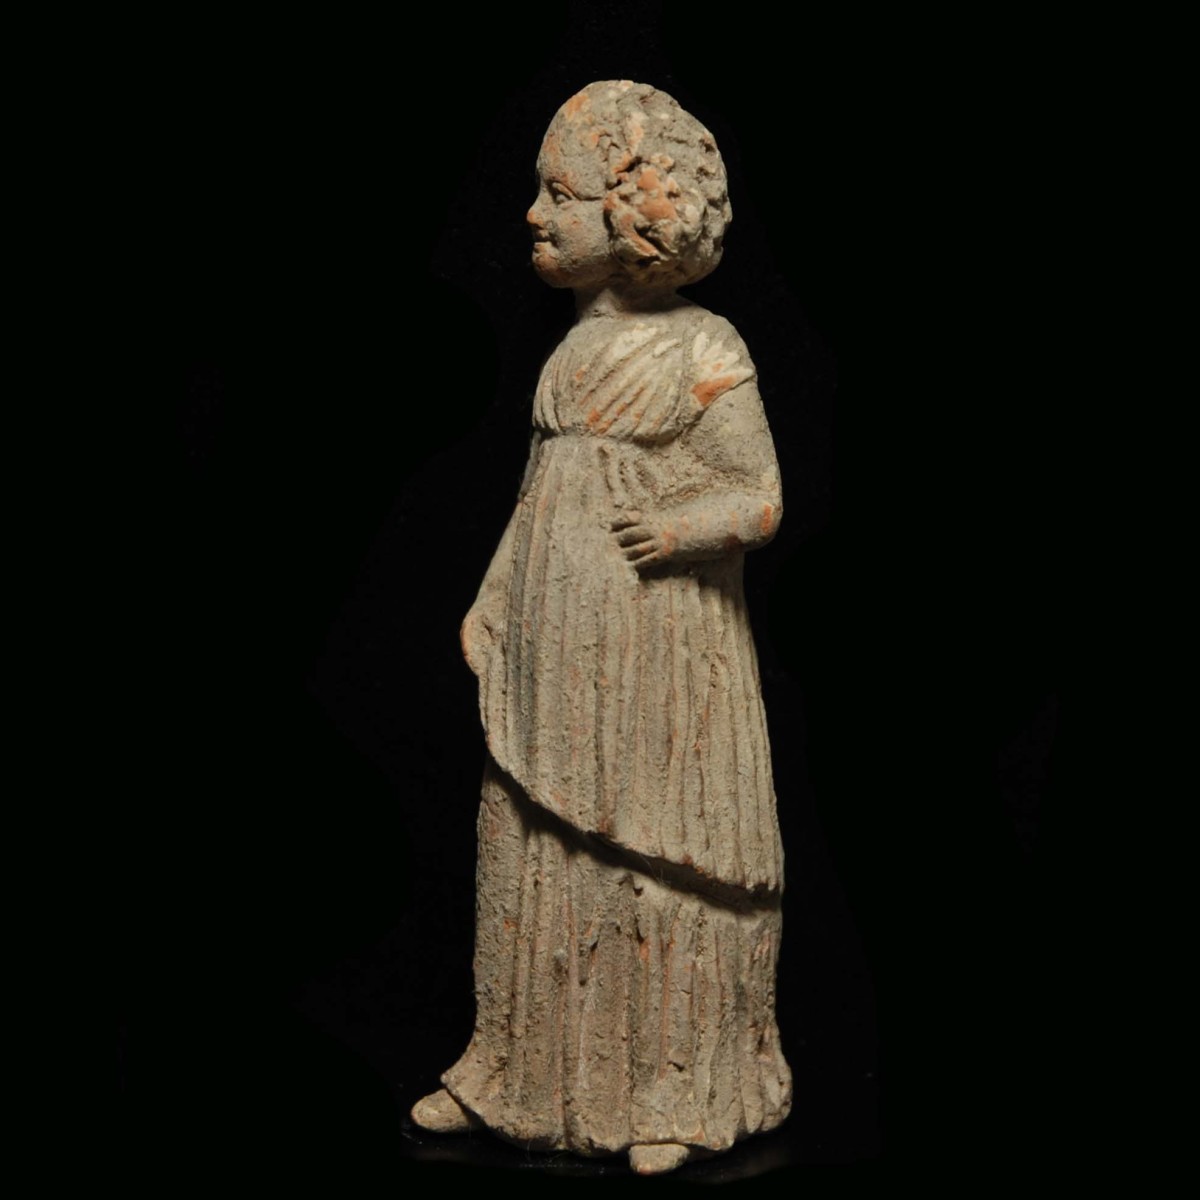 Tanagra statuette of a young girl left